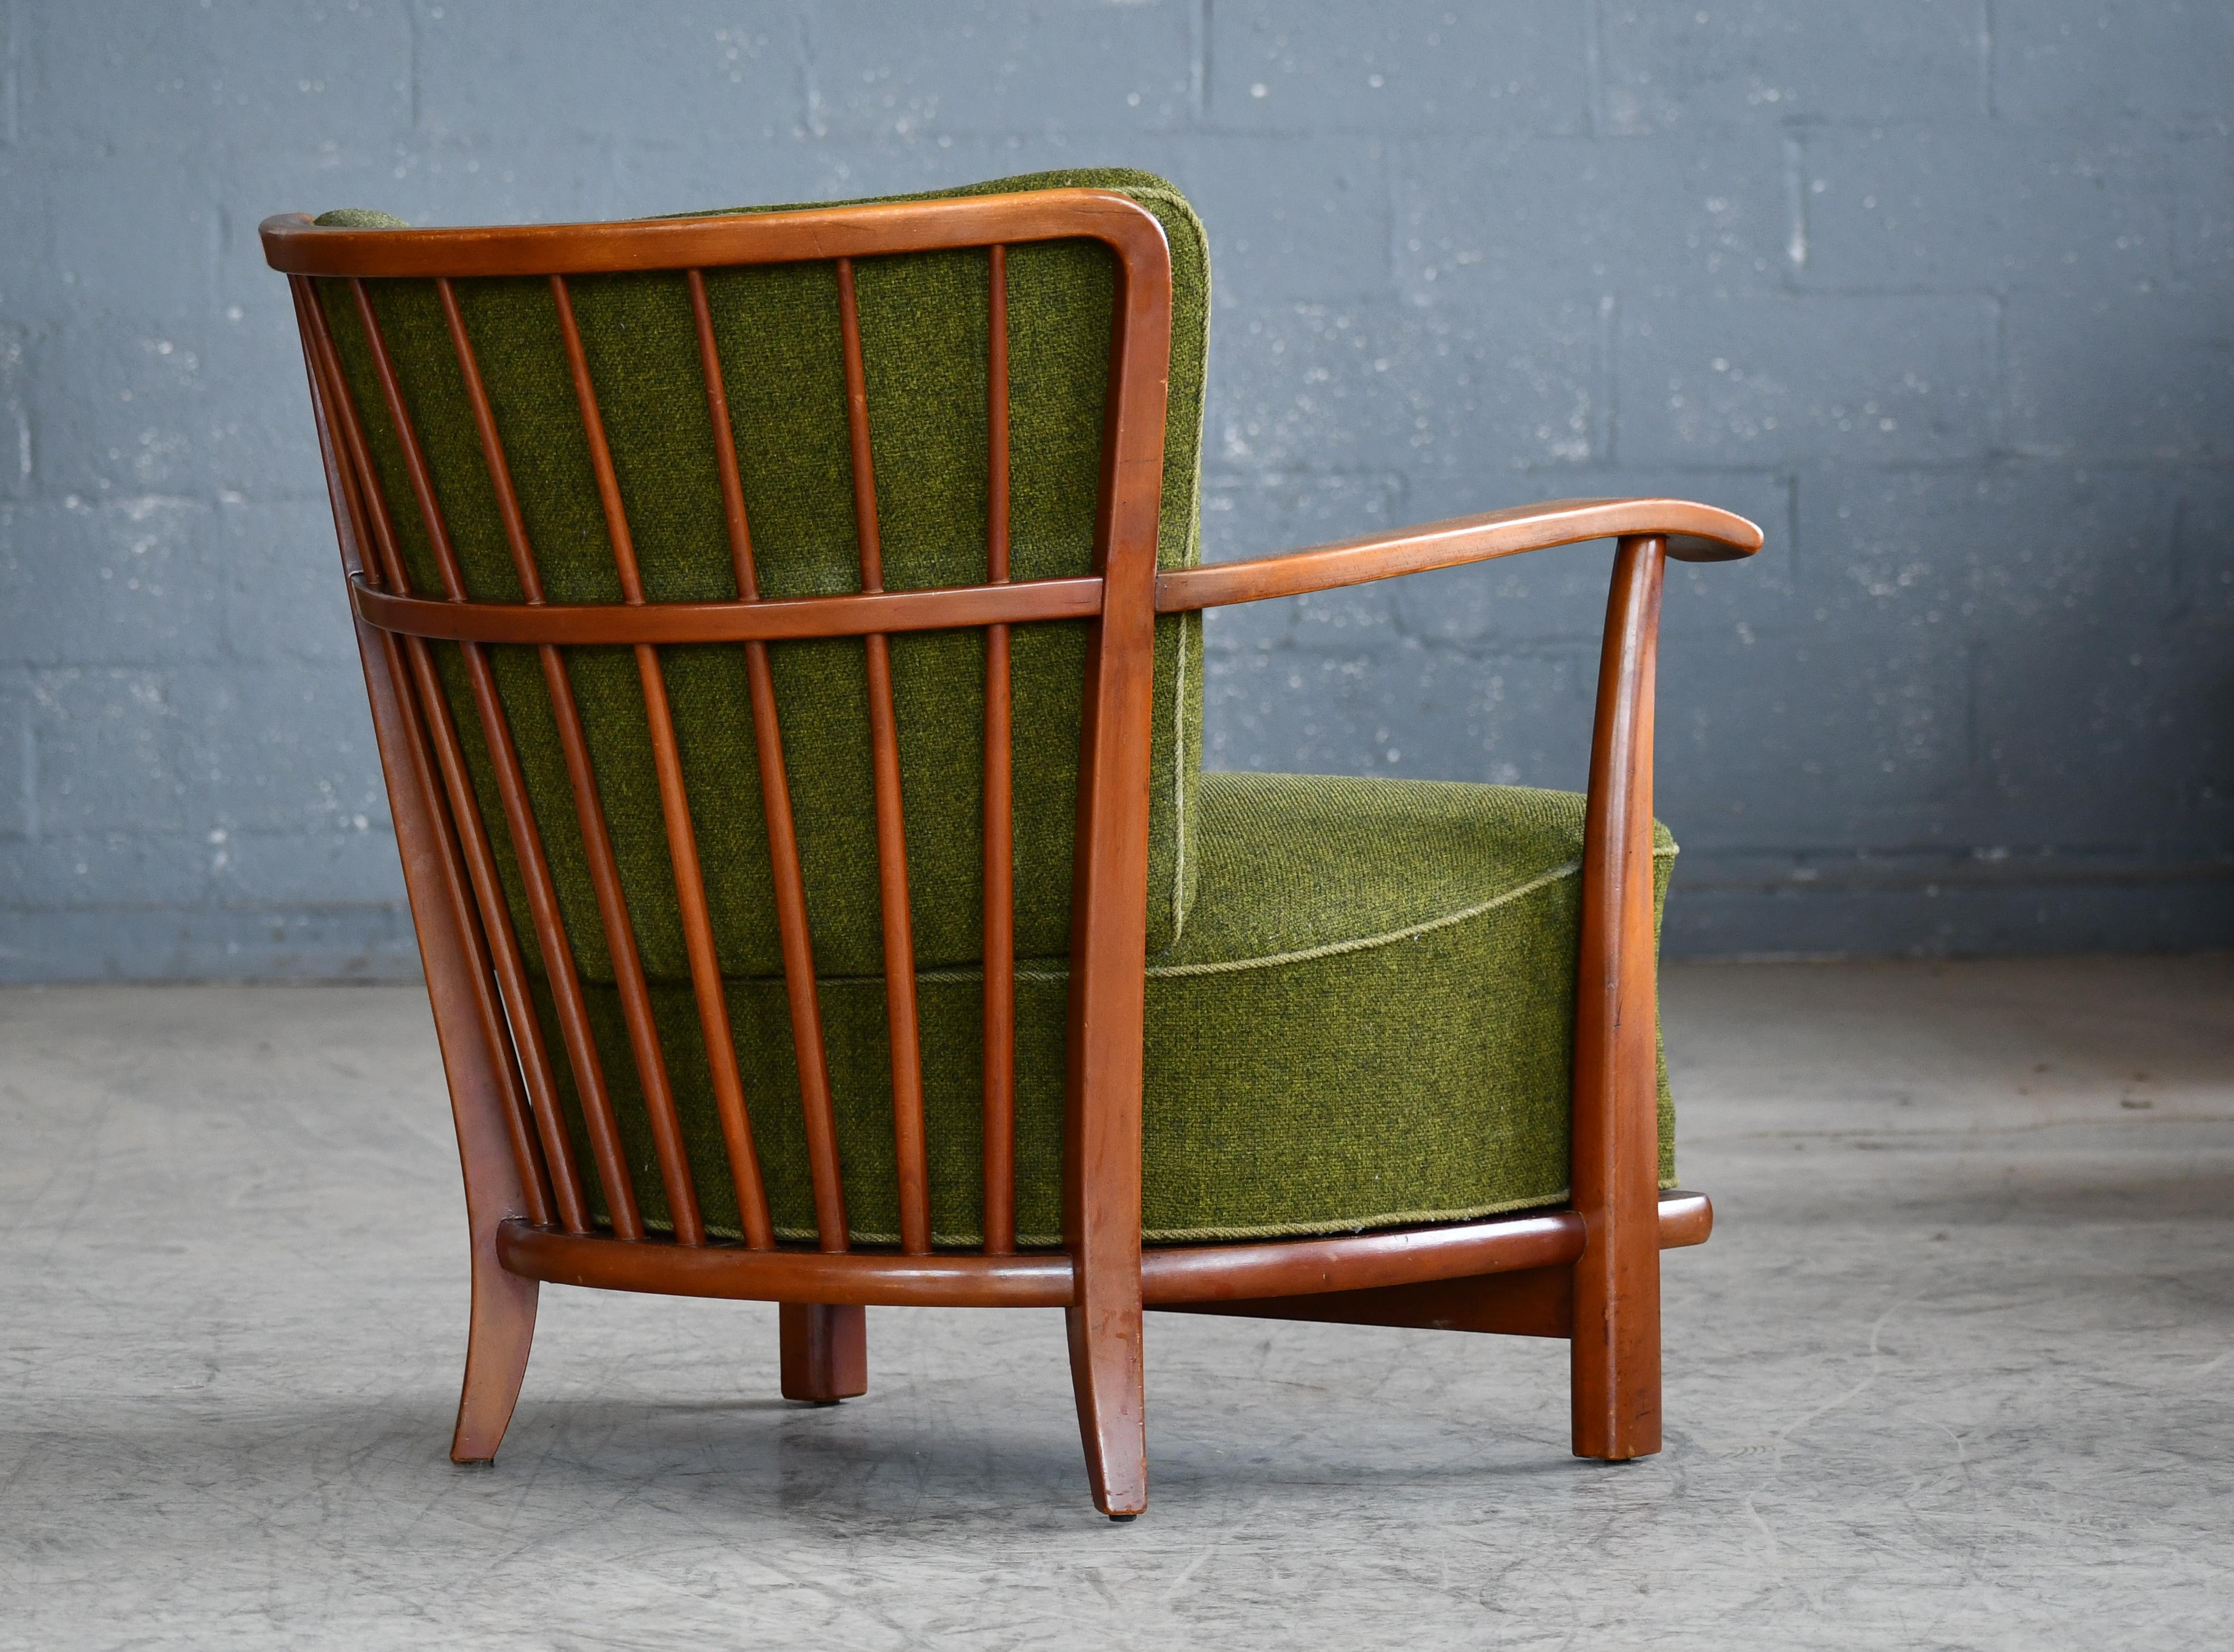 Danish Spindle Back Lounge Chair by Frits Schlegel Model 1594 for Fritz Hansen, 1940s For Sale